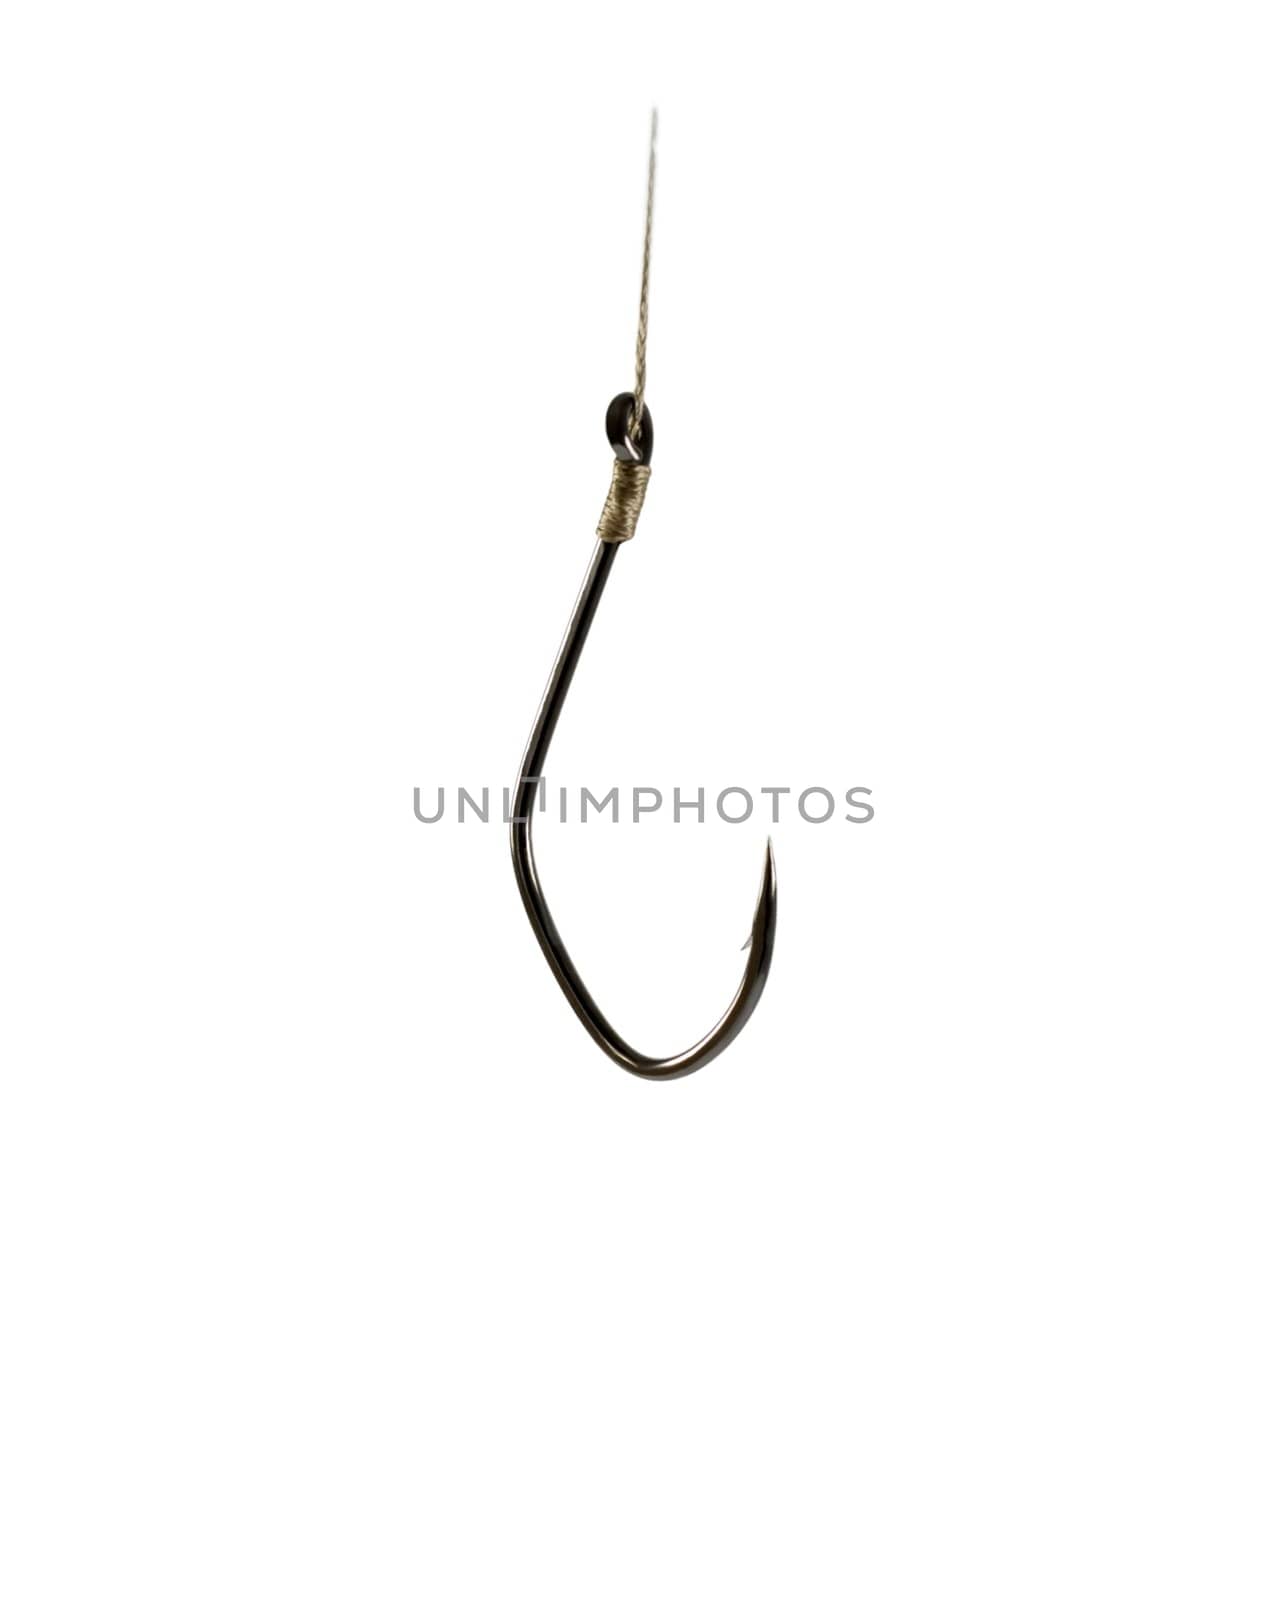 Sharp Fish Hook on a White Background